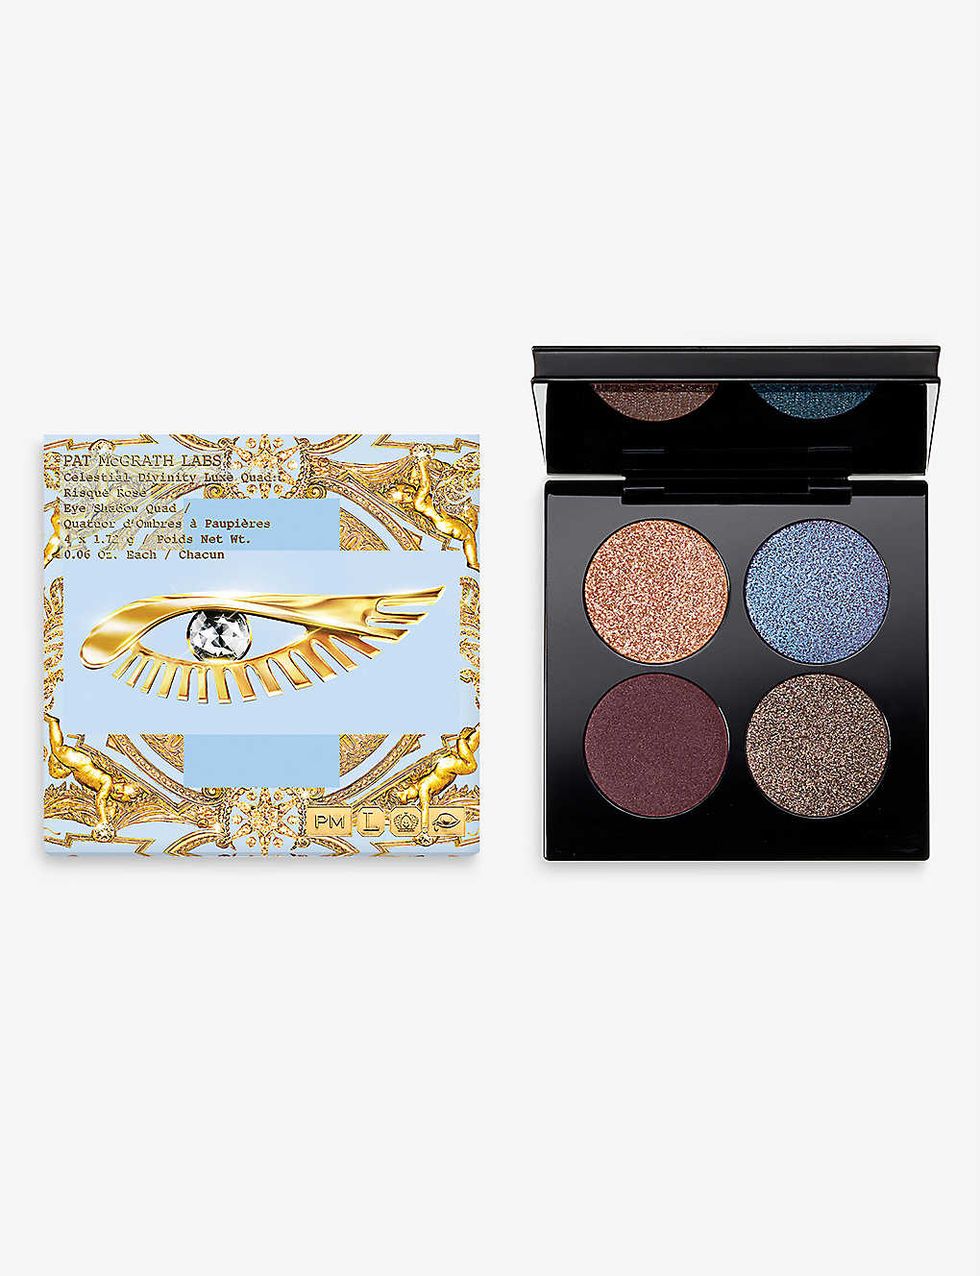 Celestial Divinity Luxe Quad eyeshadow palette